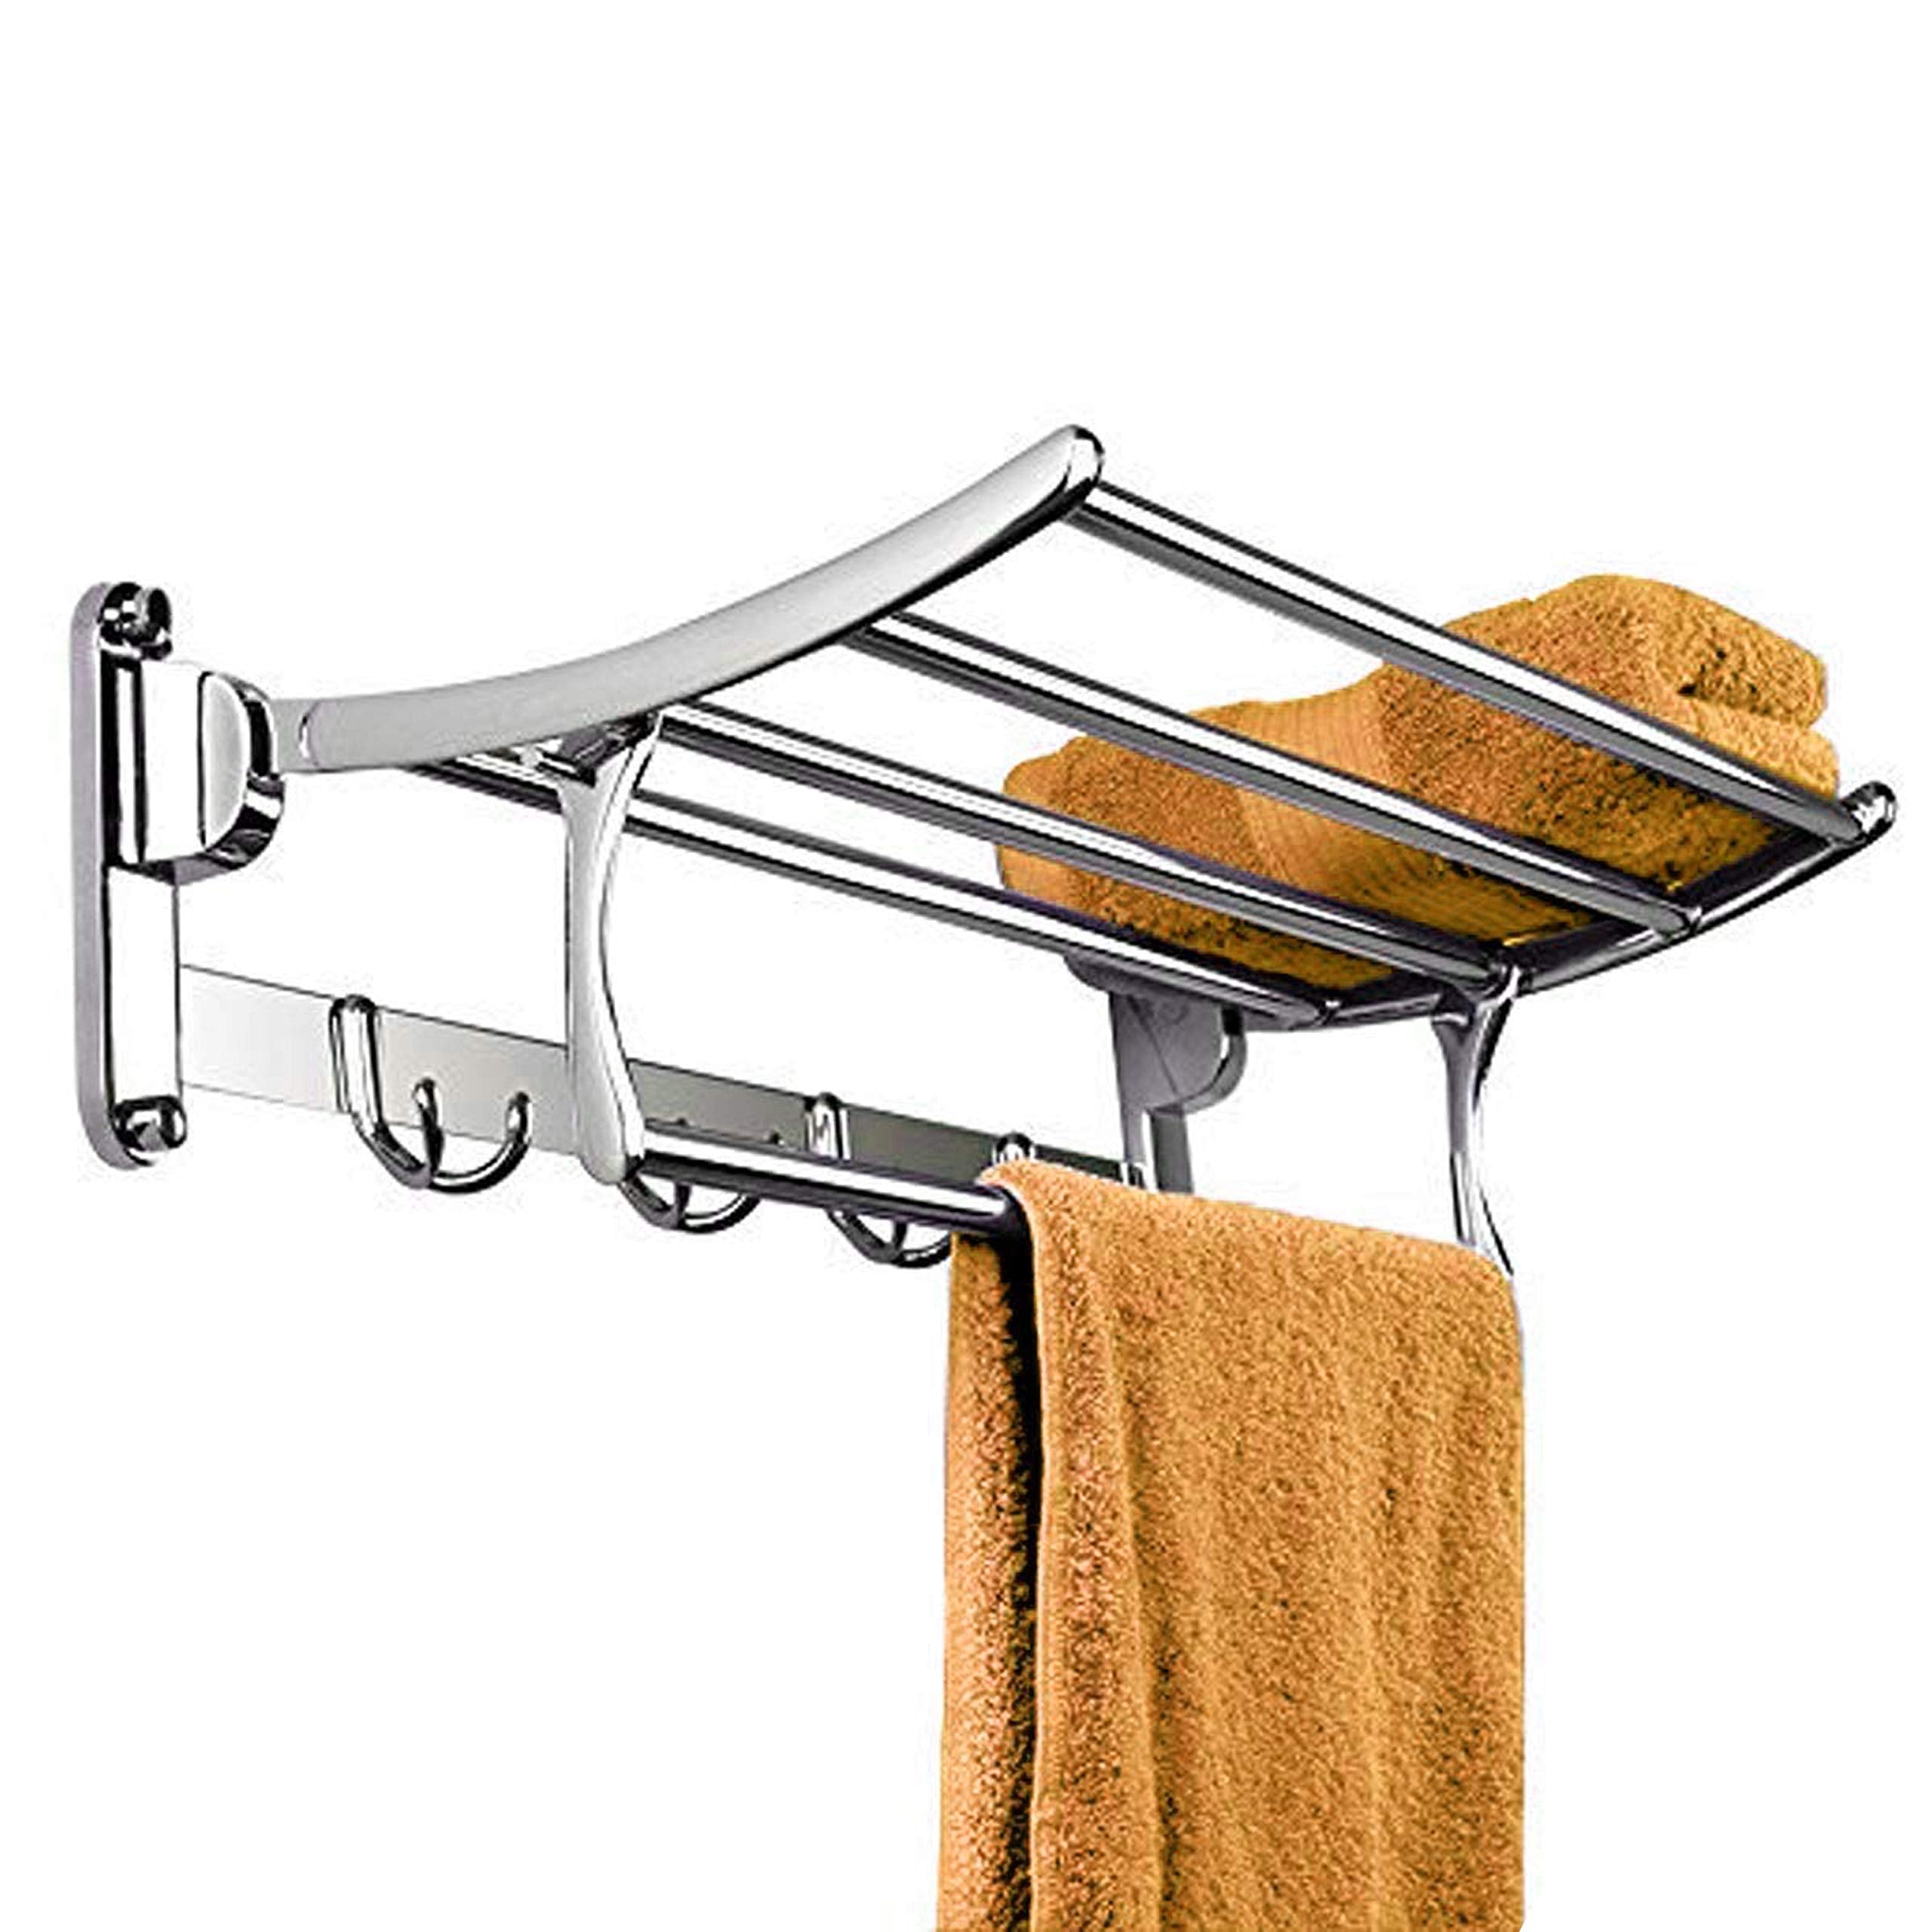 Plantex Stainless Steel Folding Towel Rack with Stainless Steel 304 Grade Cute Bathroom Accessories Set 5pcs (Towel Rod/Napkin Ring/Tumbler Holder/Soap Dish/Robe Hook)